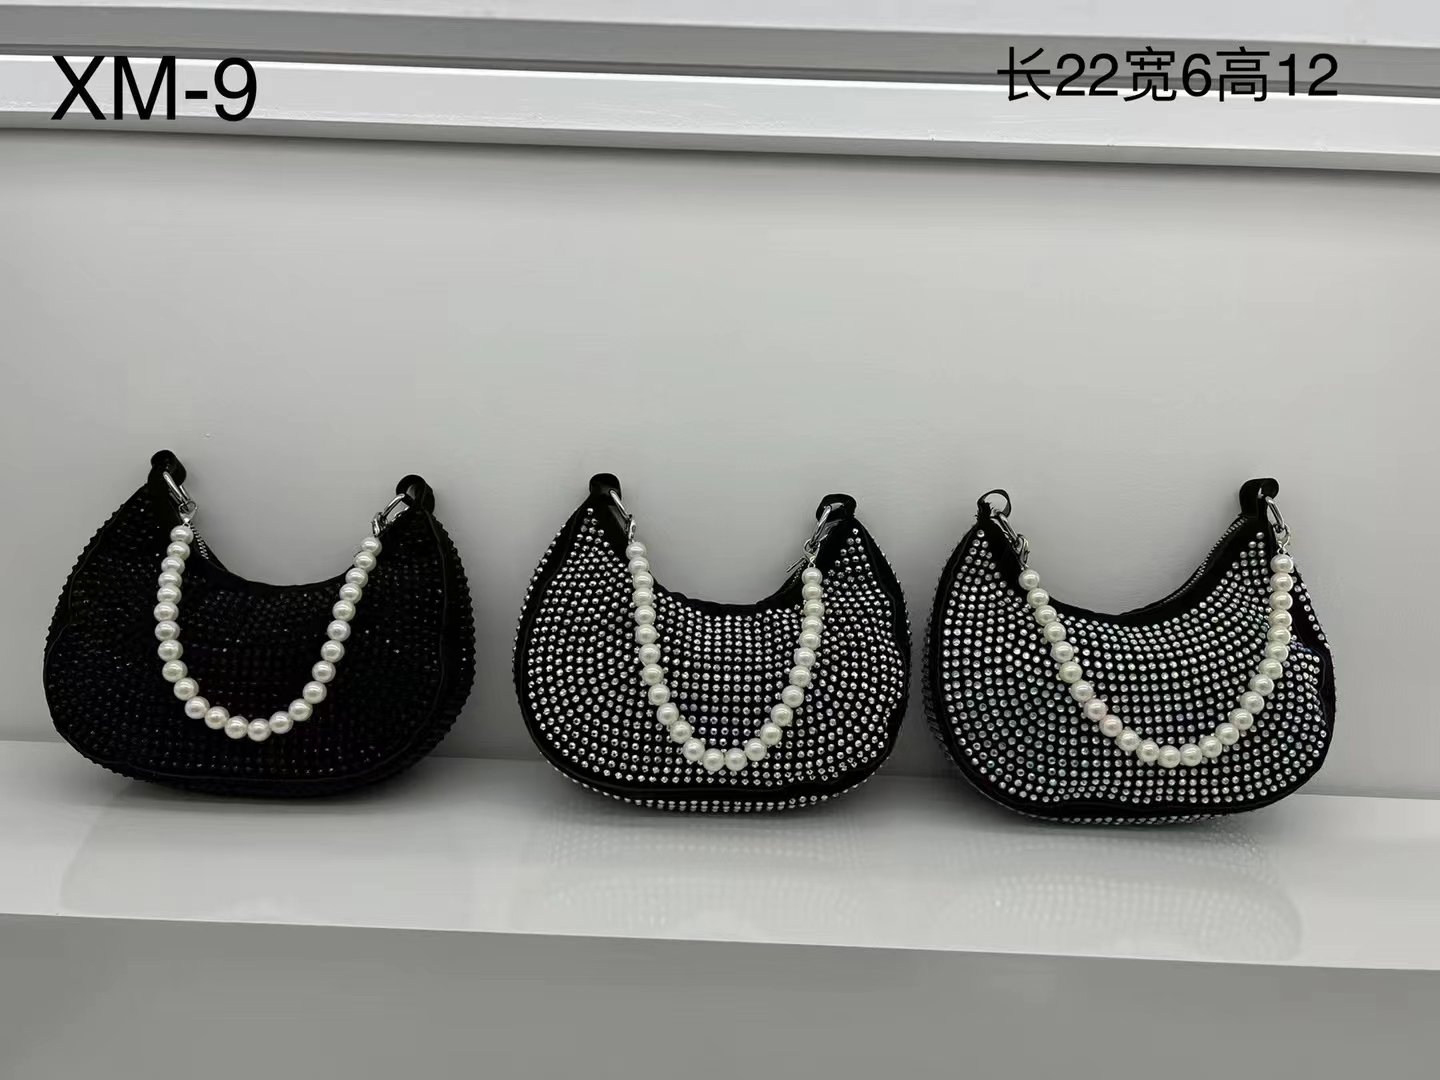 MZY Handbag Factory Manufacturing rivets leather Handbags to Manufacture business to all brand clients